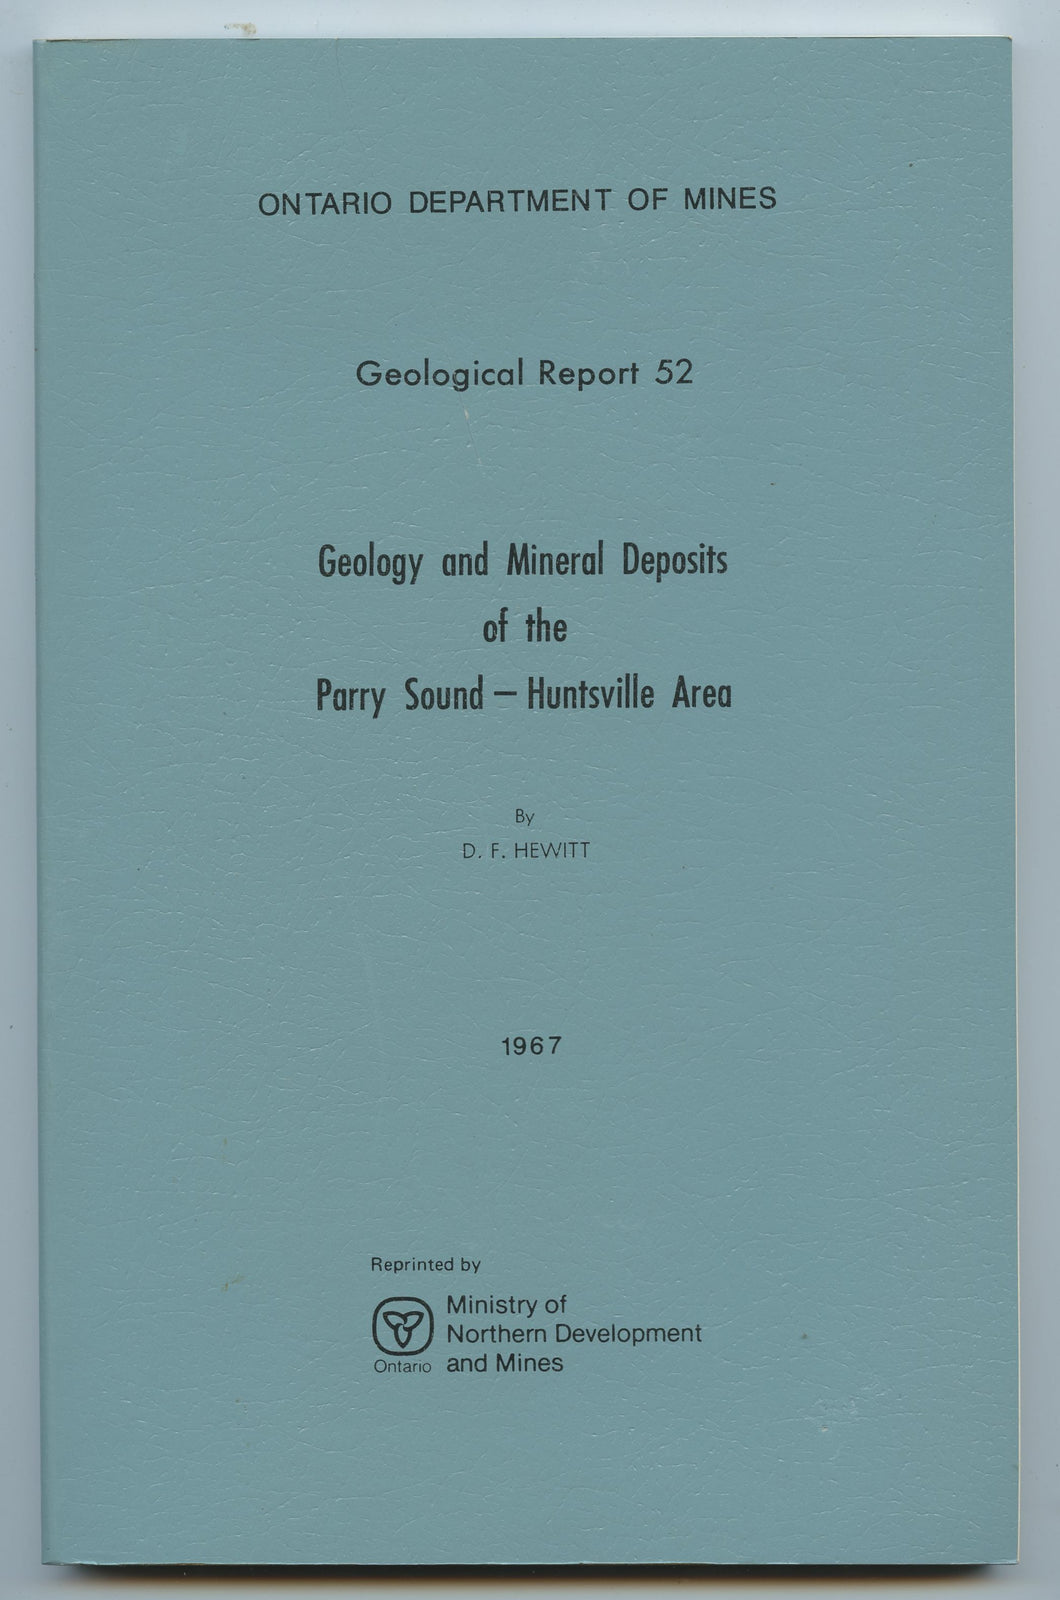 Geology and Mineral Deposits of the Parry Sound - Huntsville Area 